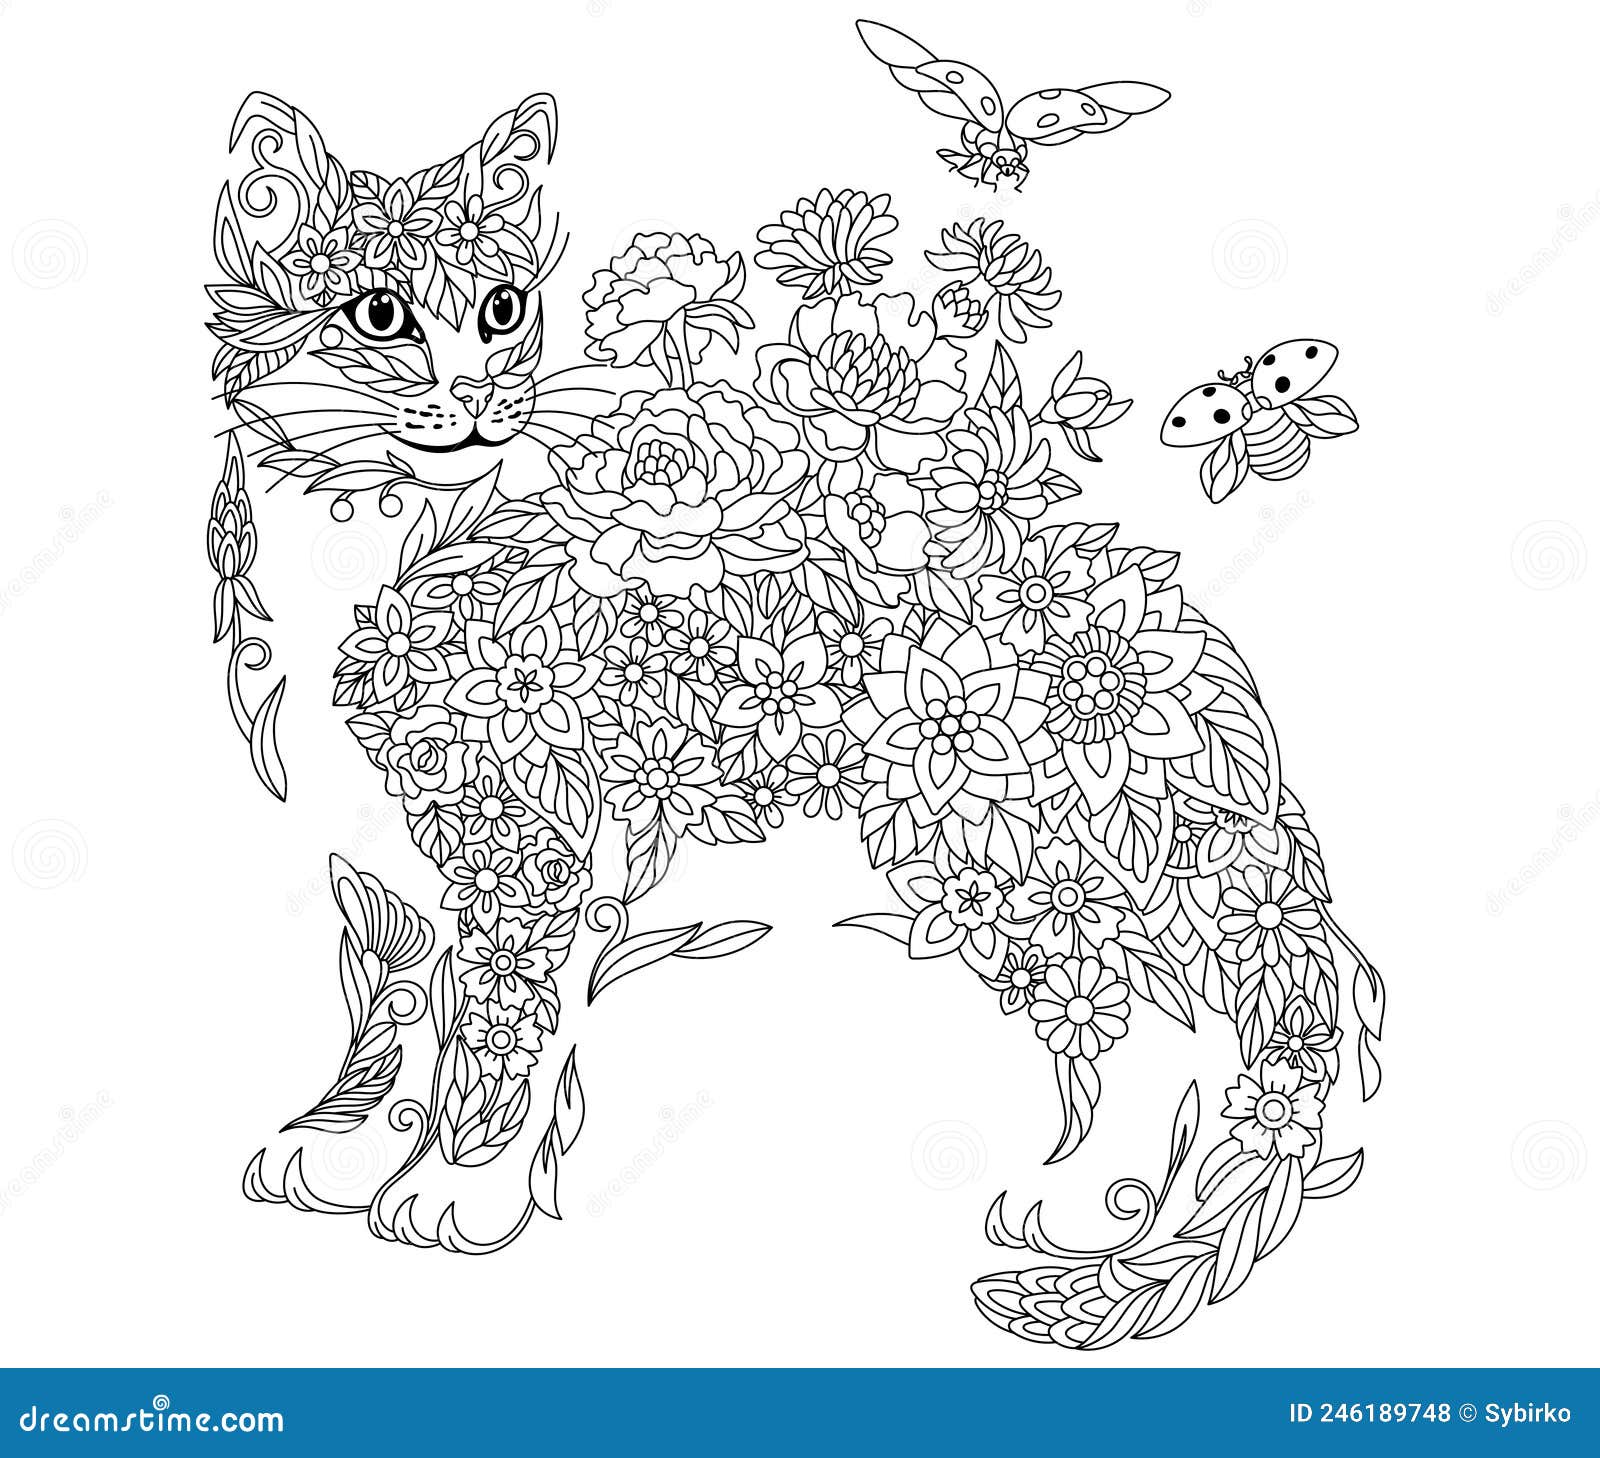 Cat coloring page stock vector illustration of beauty